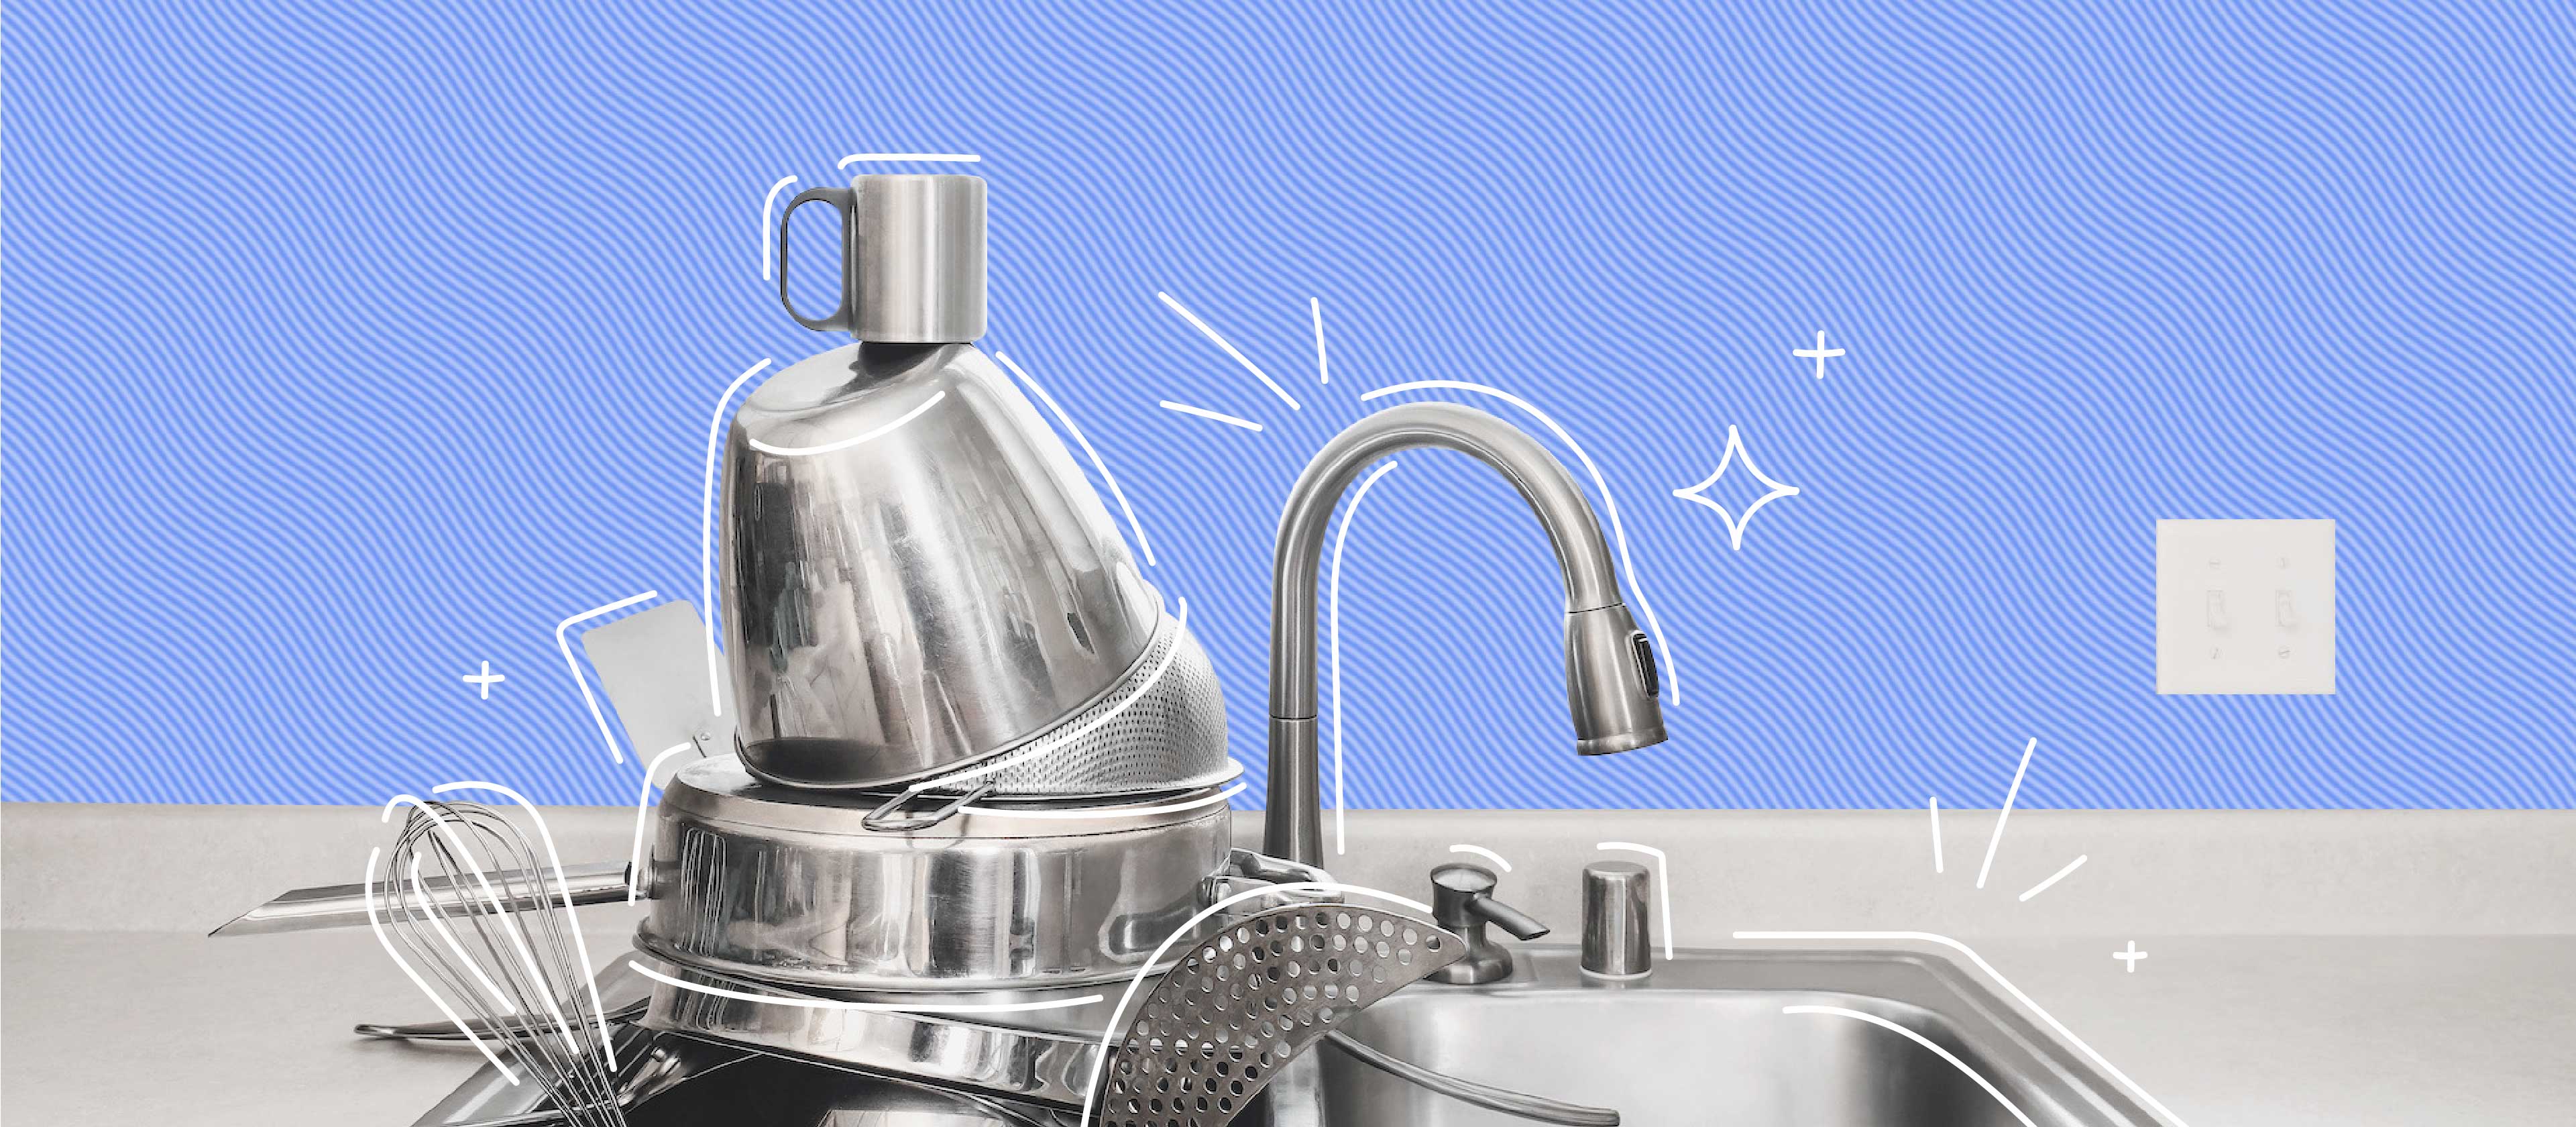 How To Clean Stainless Steel Appliances Without Harsh Chemicals